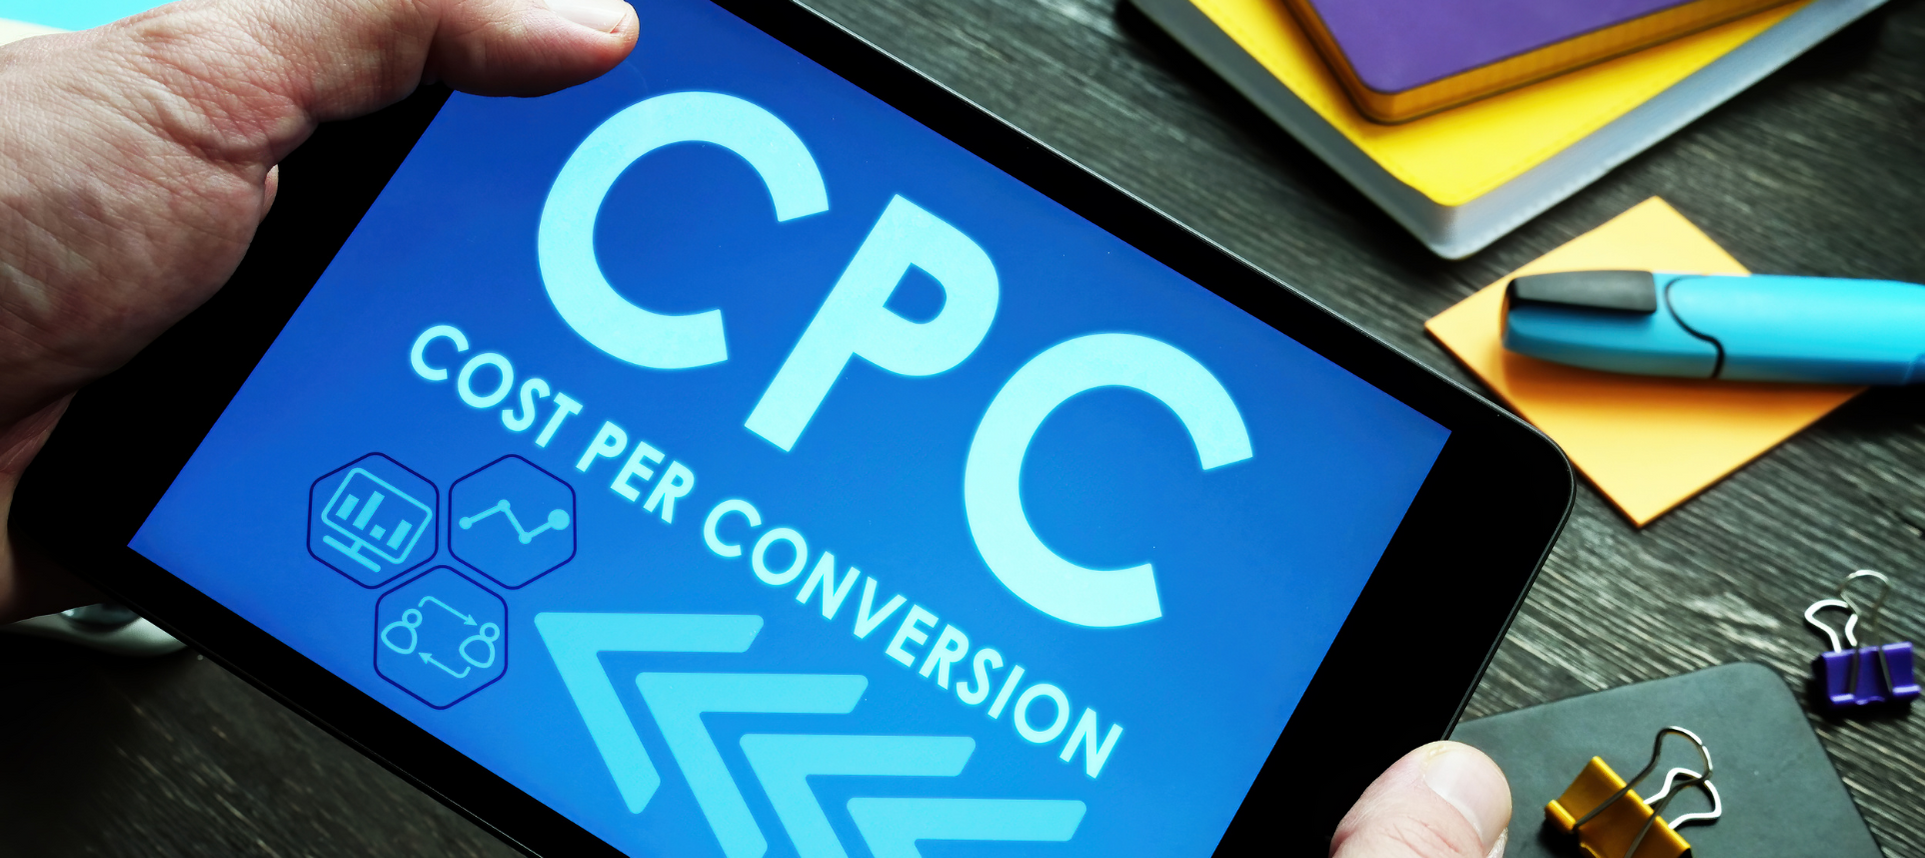 CPC in Google Ads: What You Need to Know